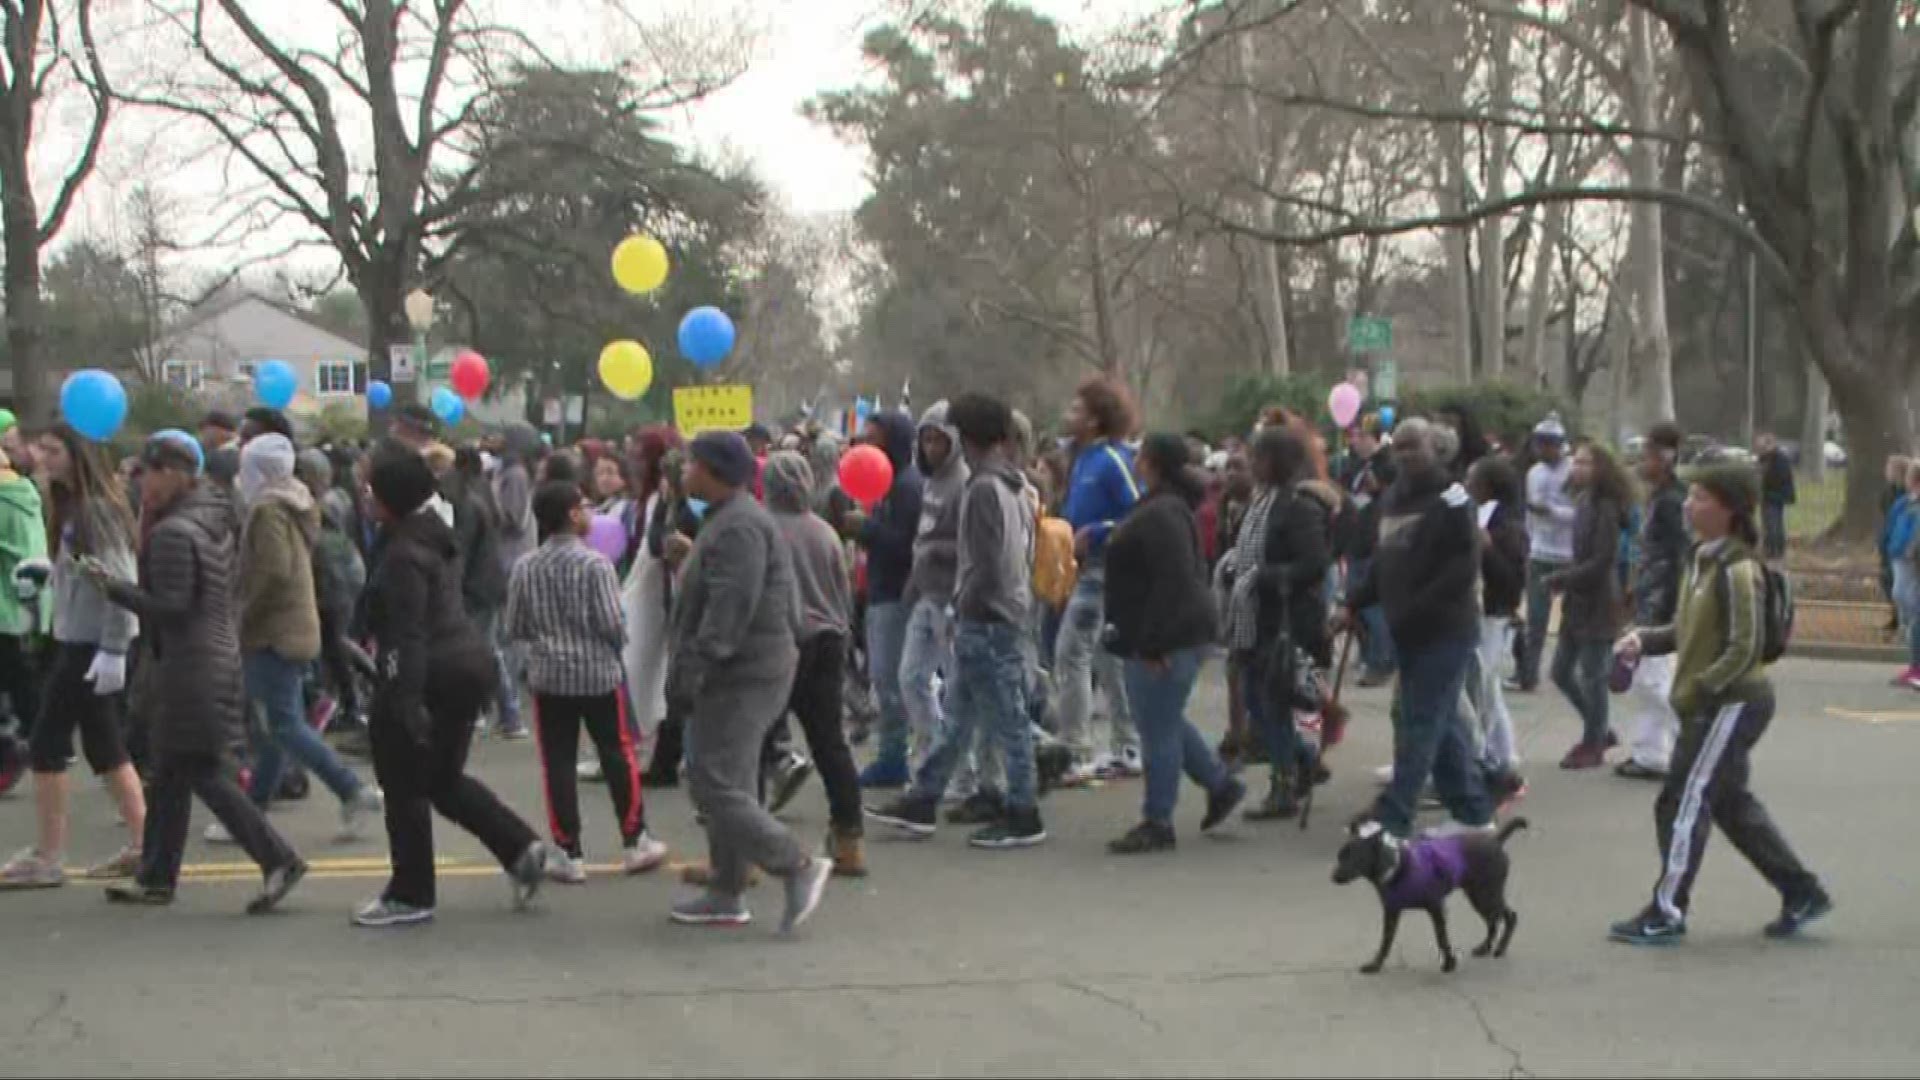 More than 20,000 will join the 39th annual March for the Dream. The official walk begins at Sacramento City College at 9 a.m. and is approximately four miles long.